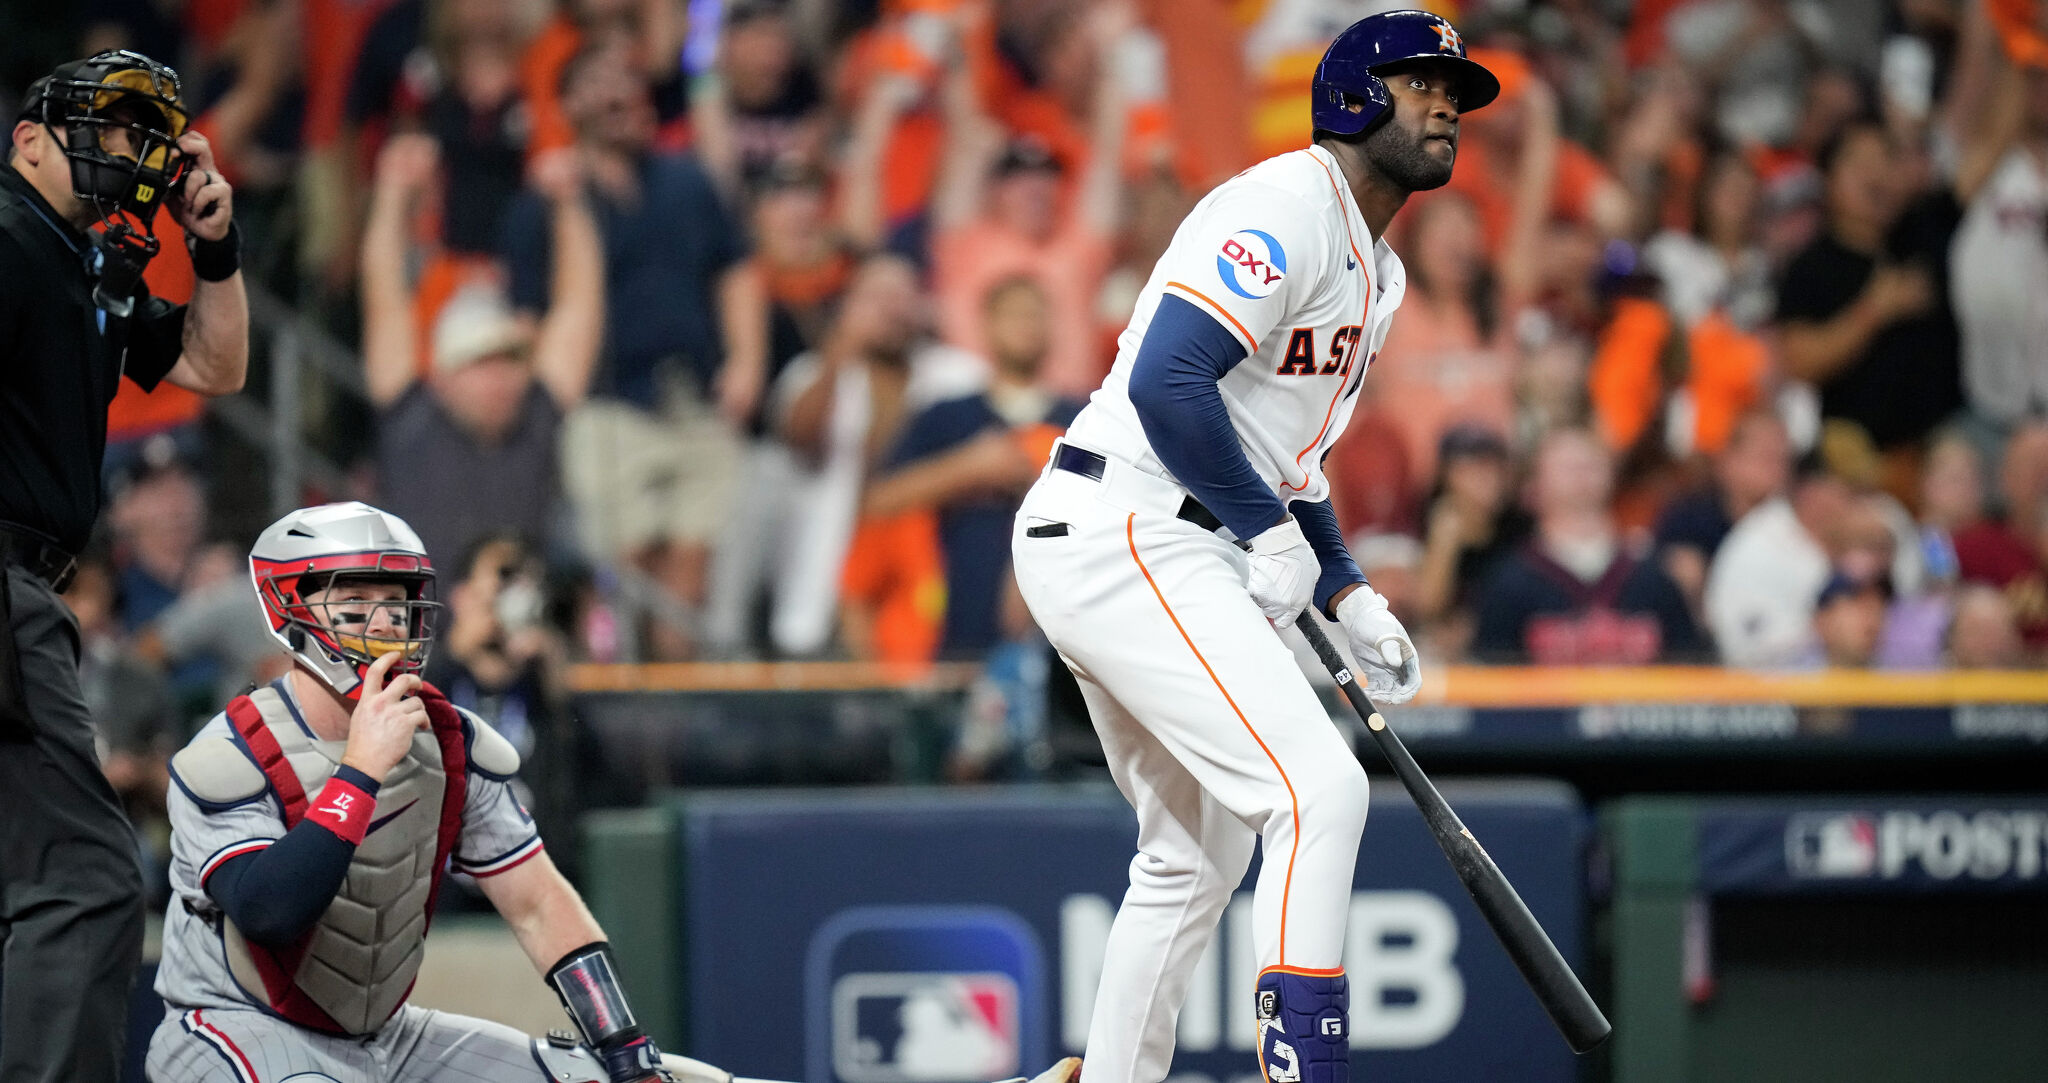 Astros' Bregman Gives Advice on How to Play Third Base to Young Fan -  Sports Illustrated